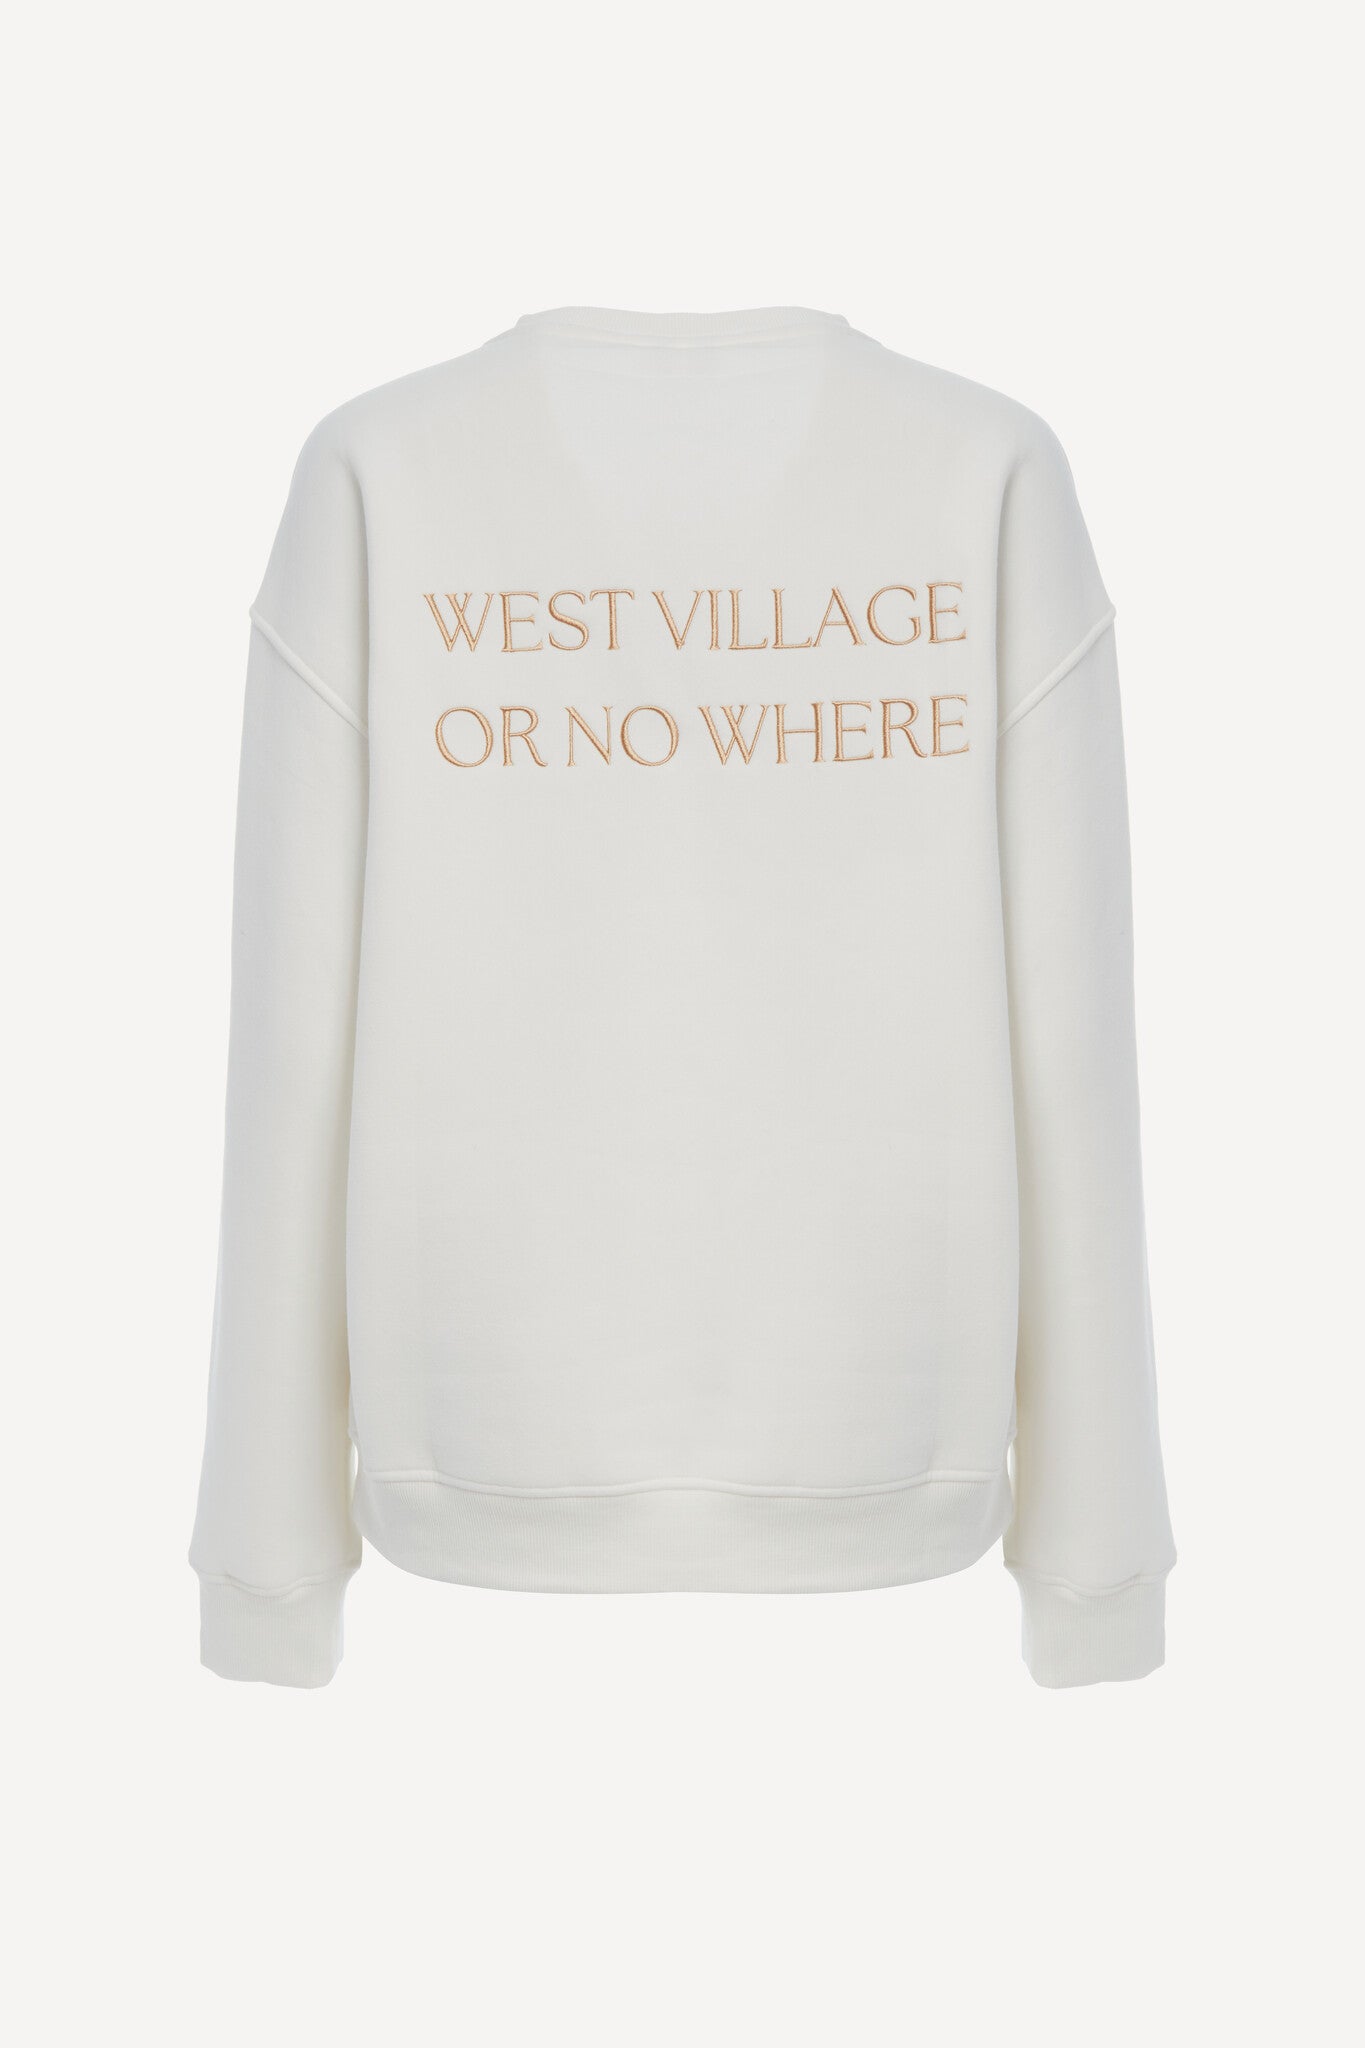 WB Sweater West Village Or Nowhere